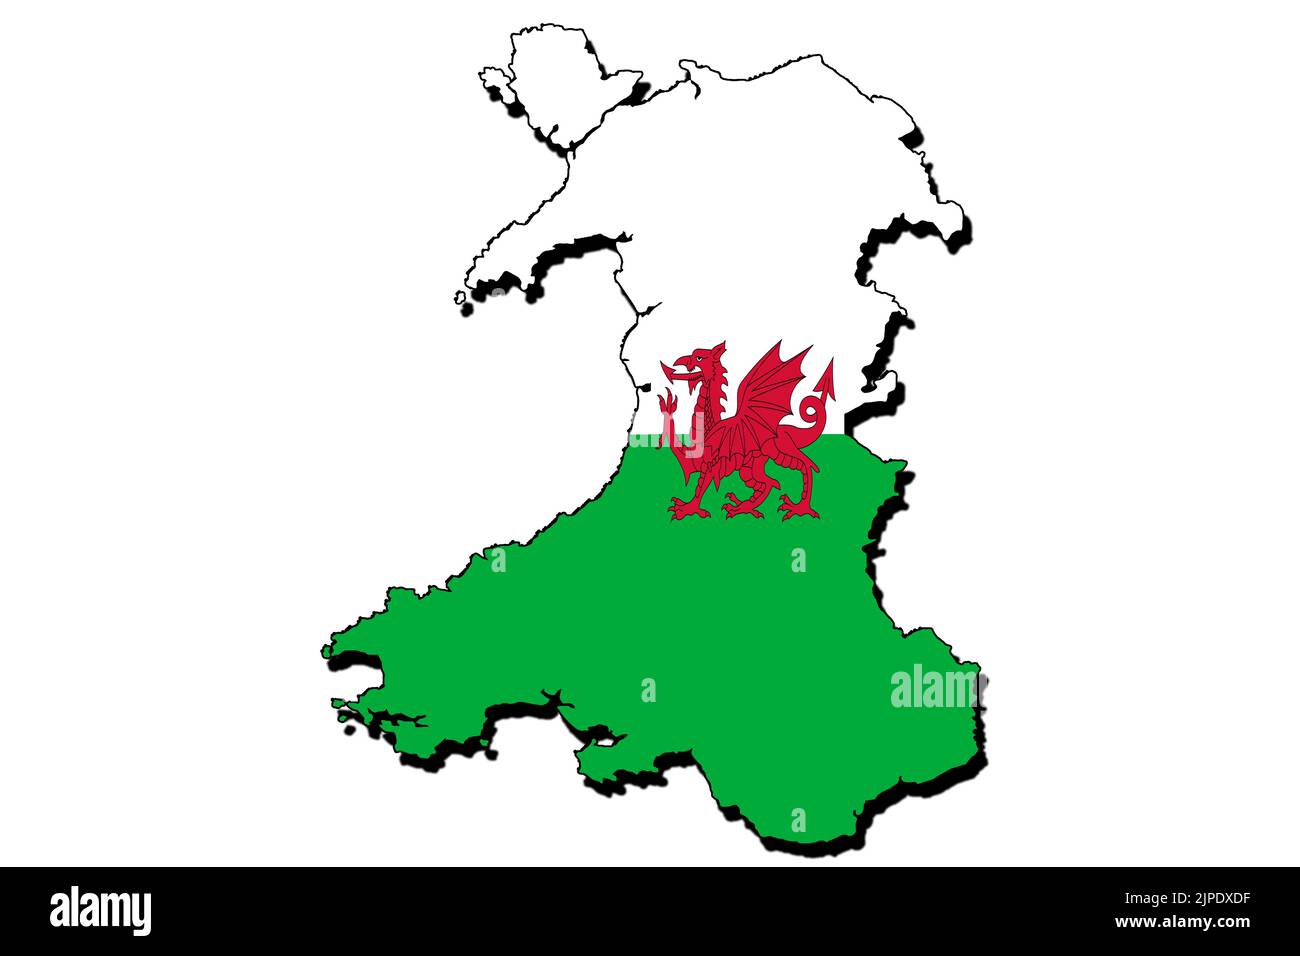 Silhouette of the map of Wales with its flag Stock Photo